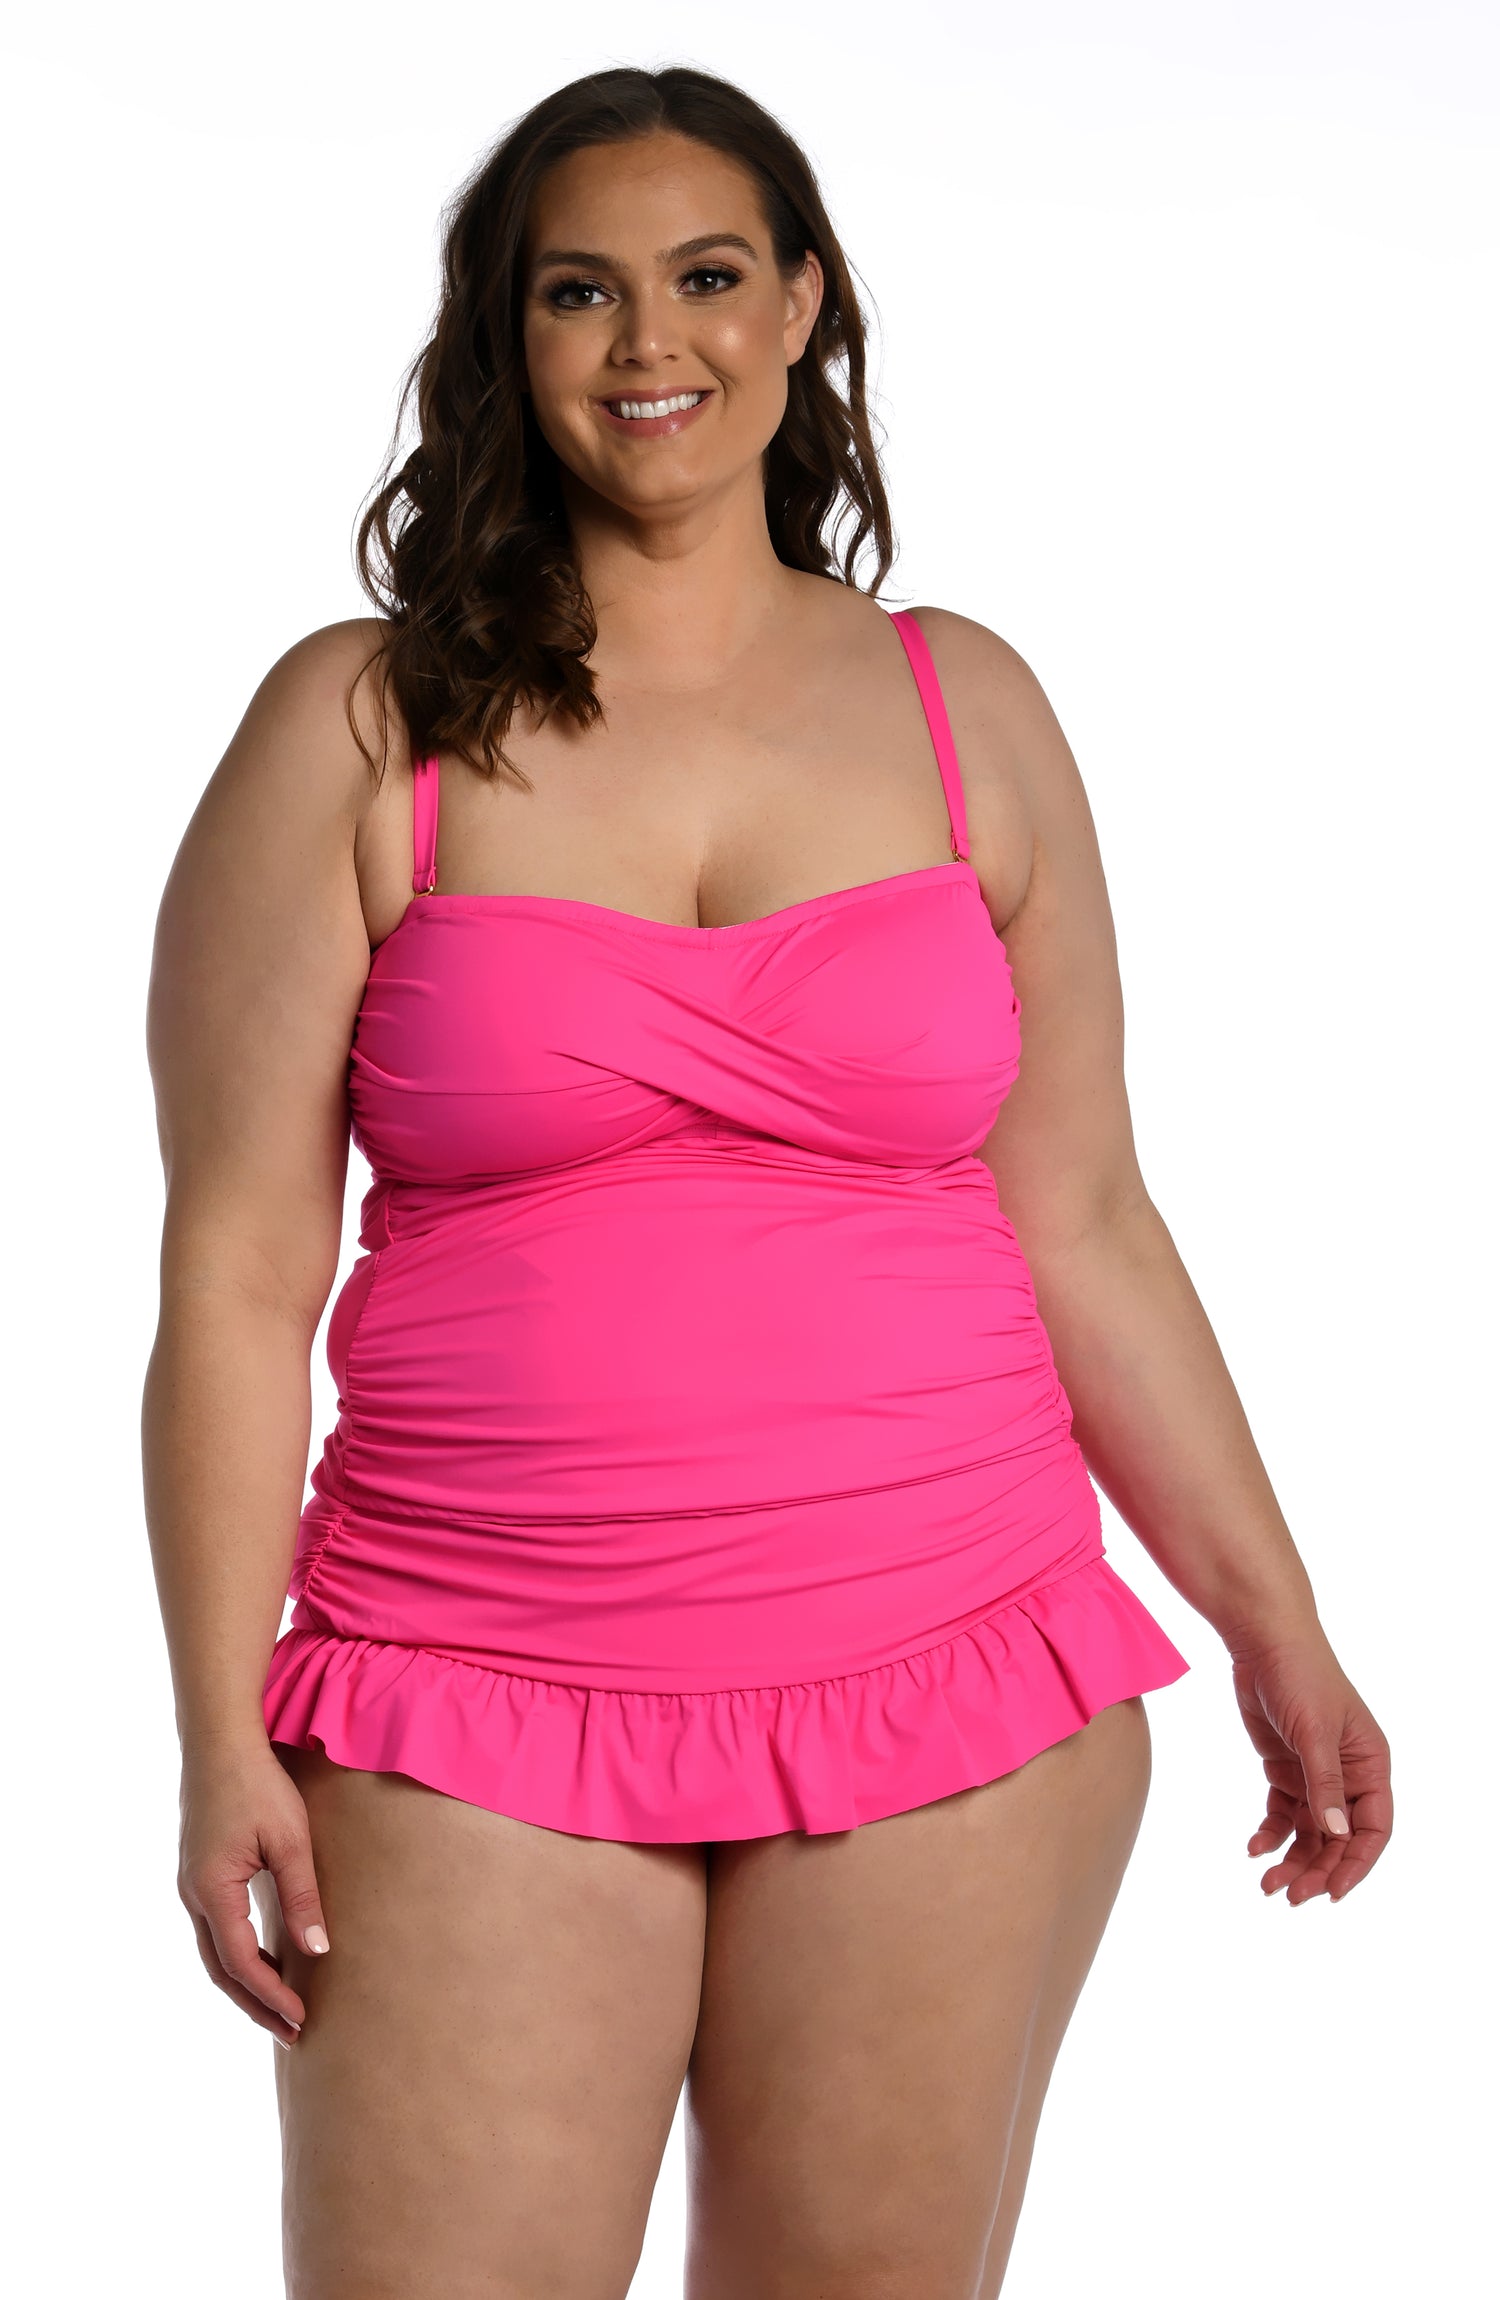 Model is wearing a pop pink colored bandeau tankini swimsuit top from our Best-Selling Island Goddess collection.